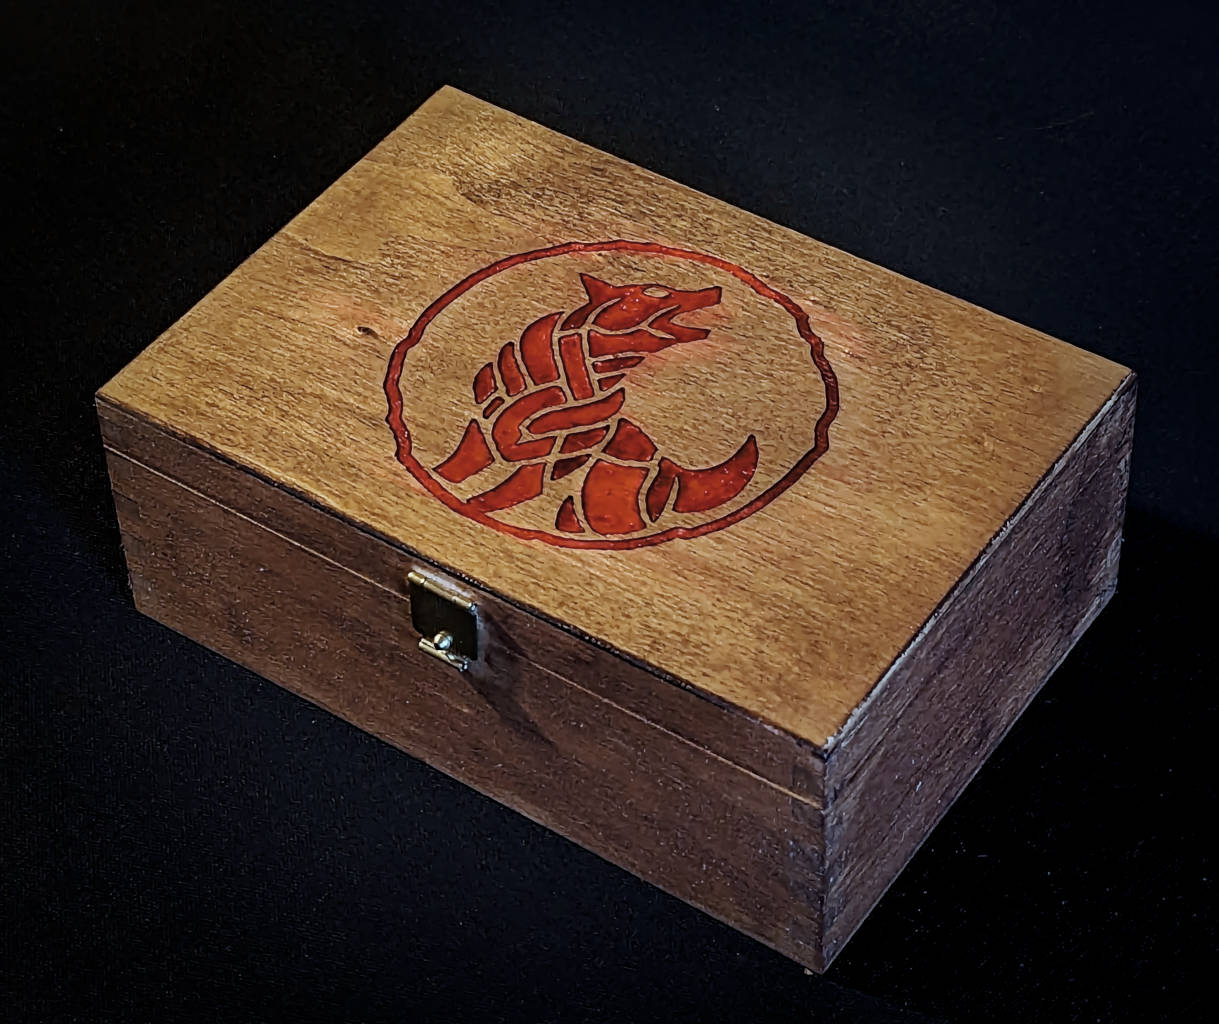 Wooden box with red coloured wolf logo as engraving.